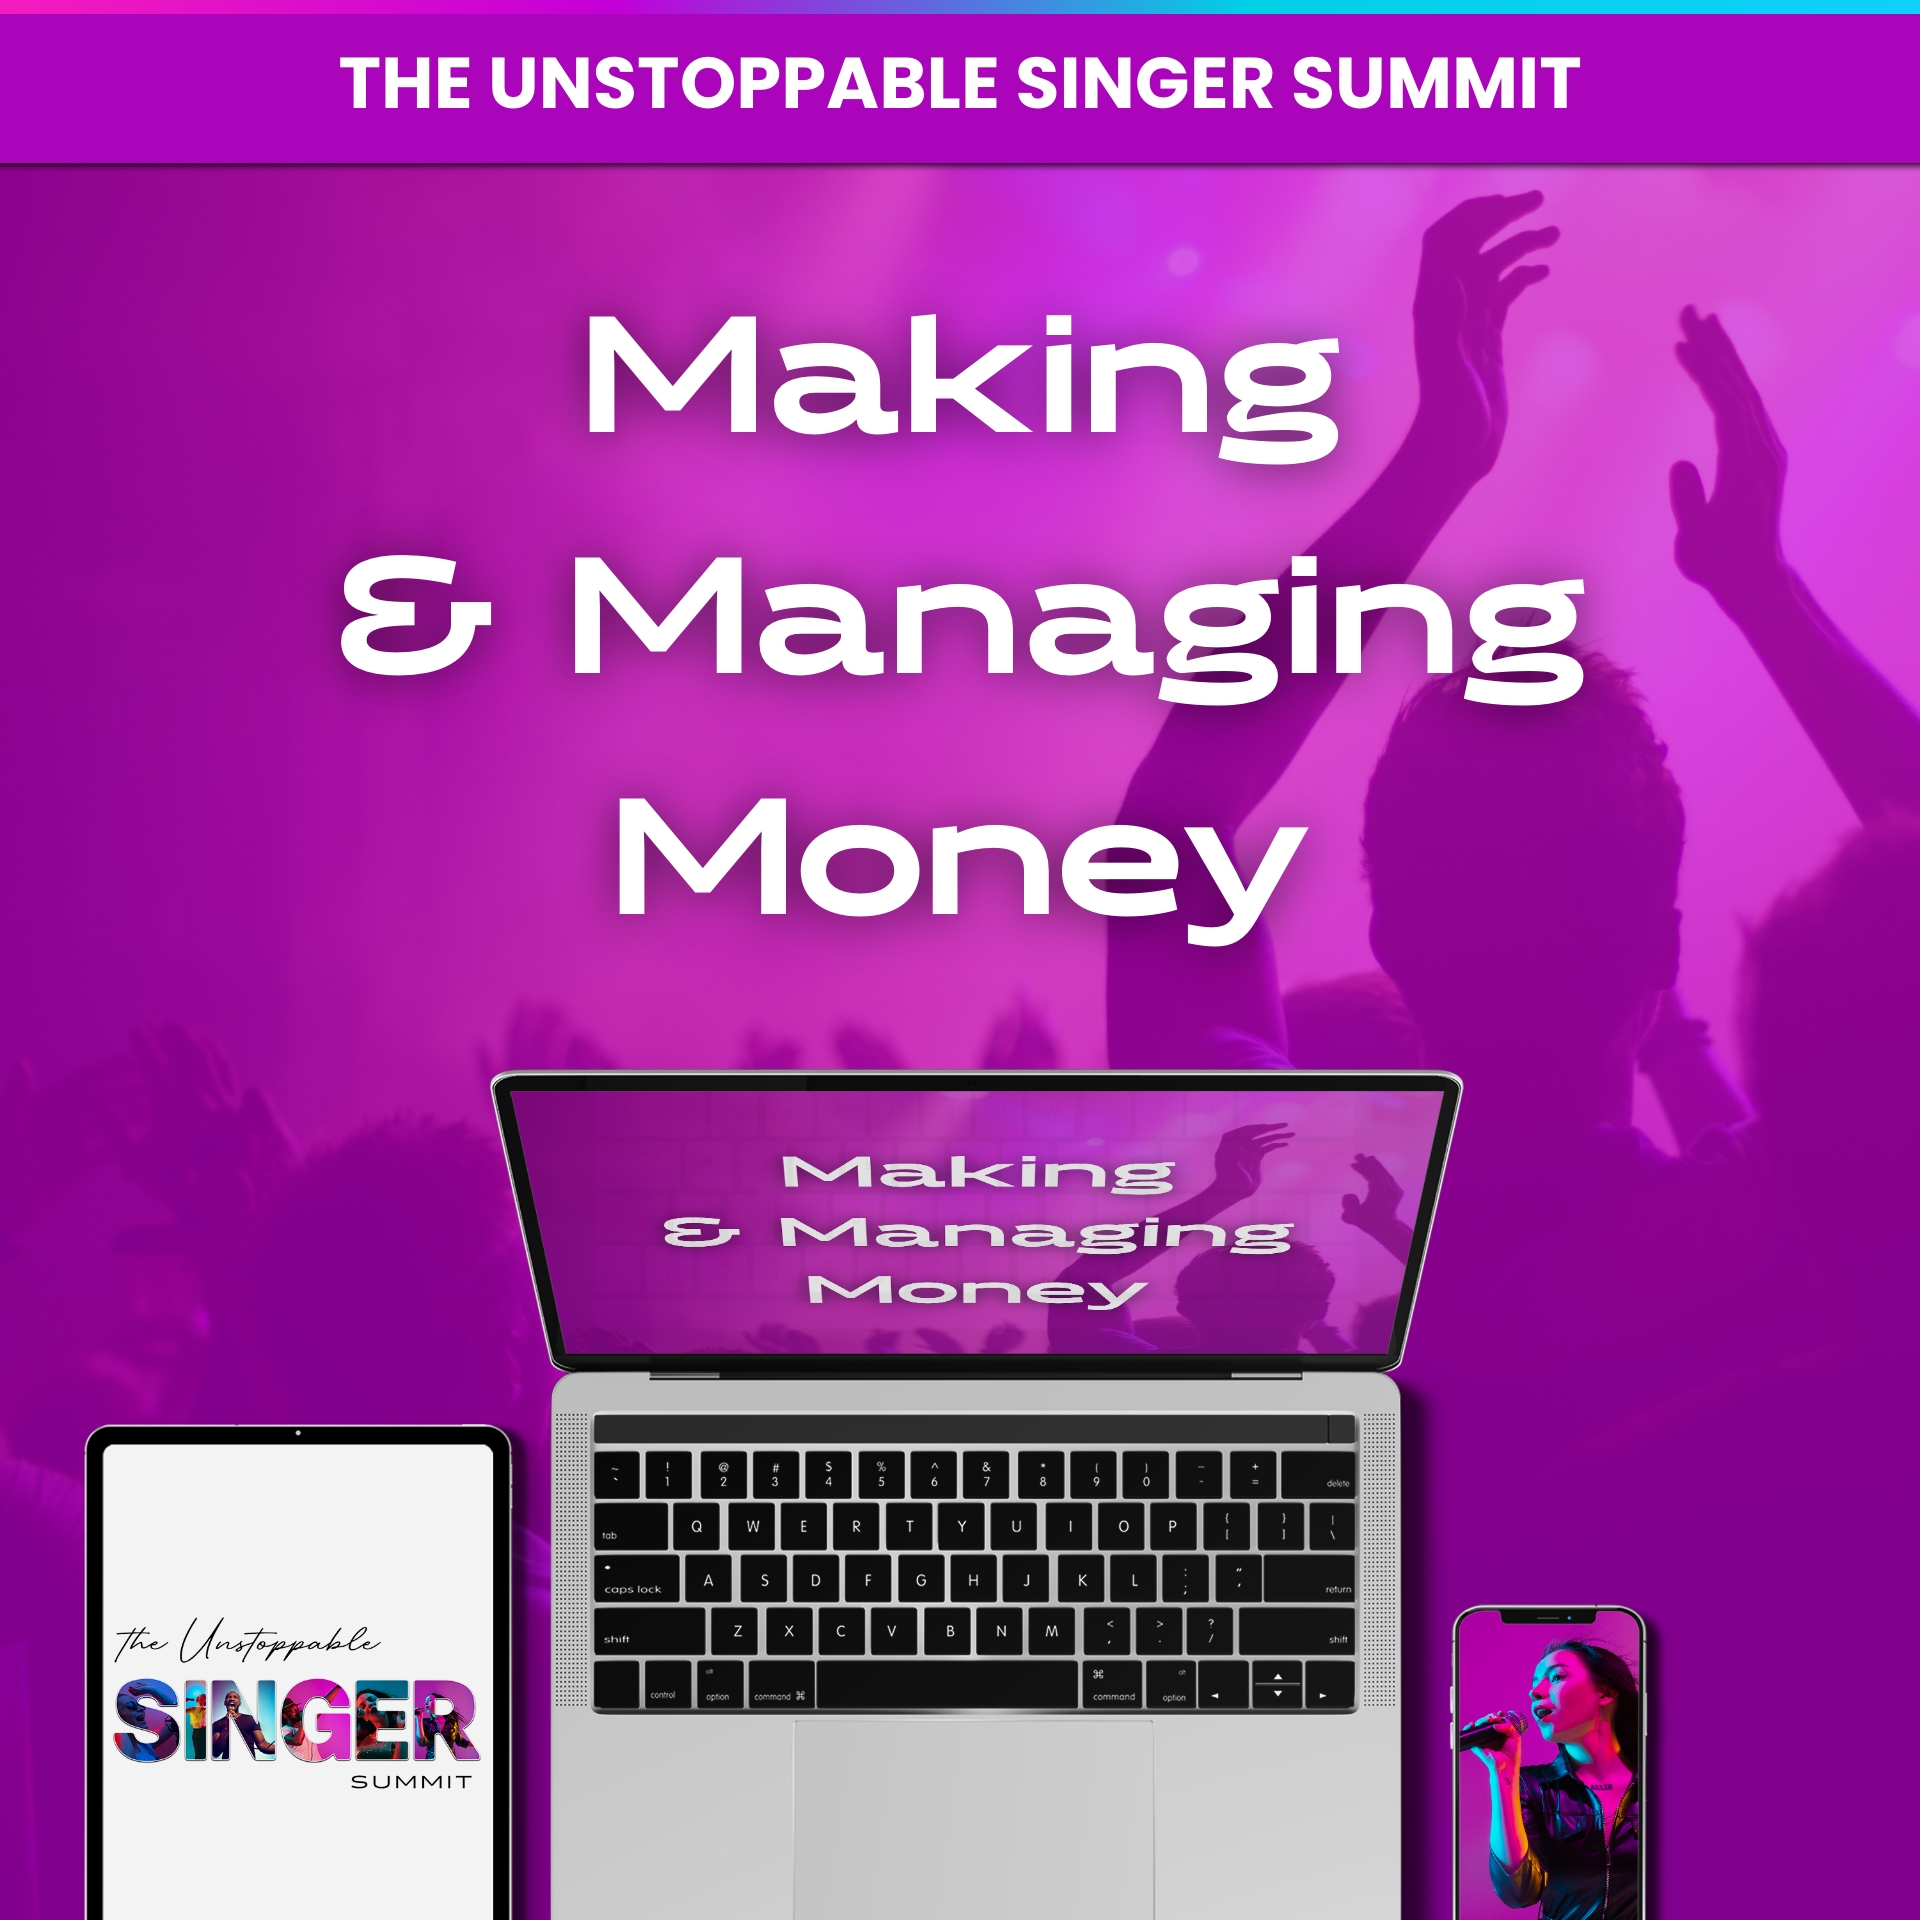 Making and Managing Money - The Unstoppable Singer Summit